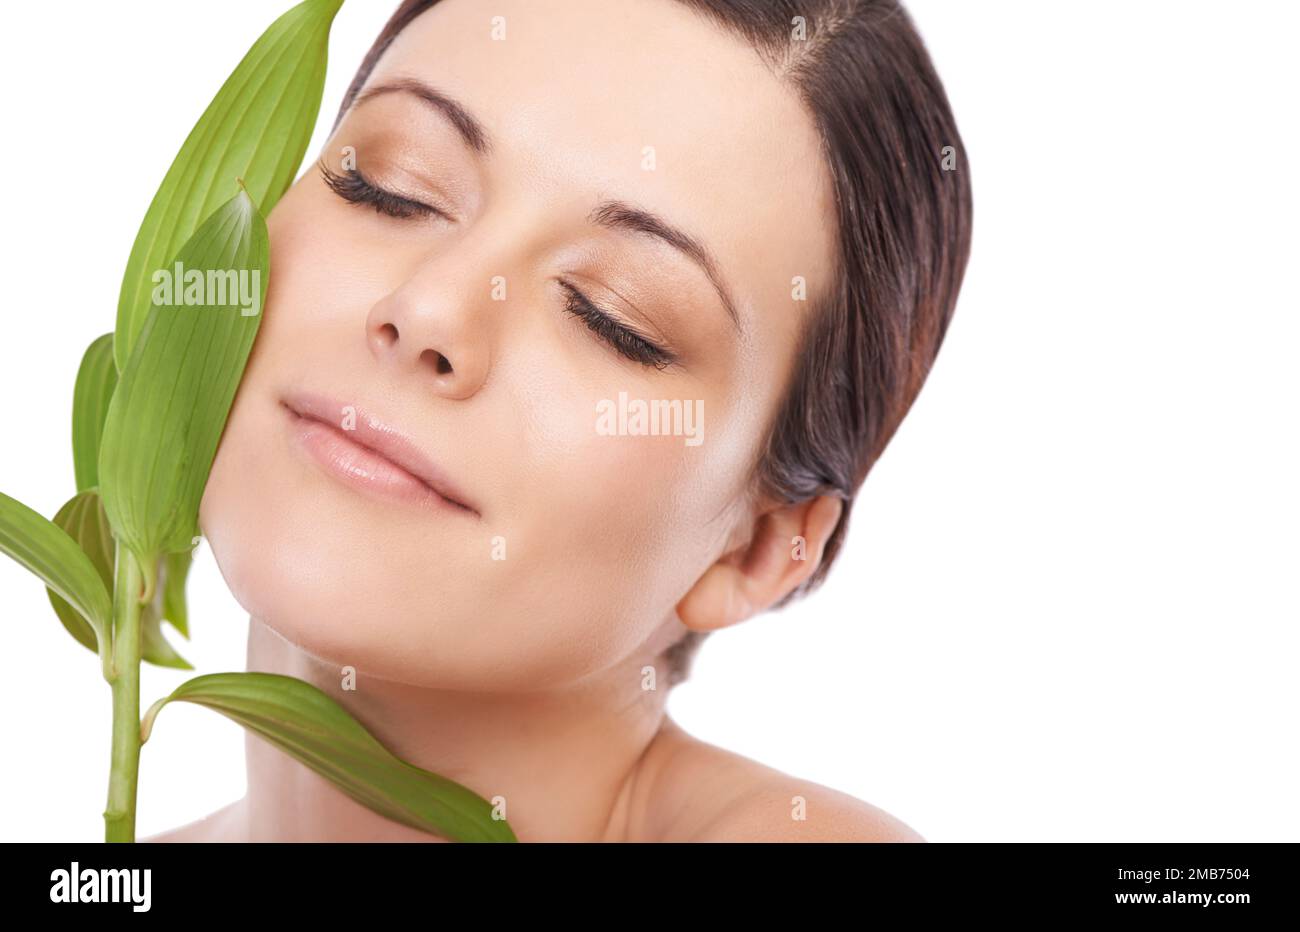 Natural skincare. An isolated image of a woman stroking her cheek with a green leaf. Stock Photo